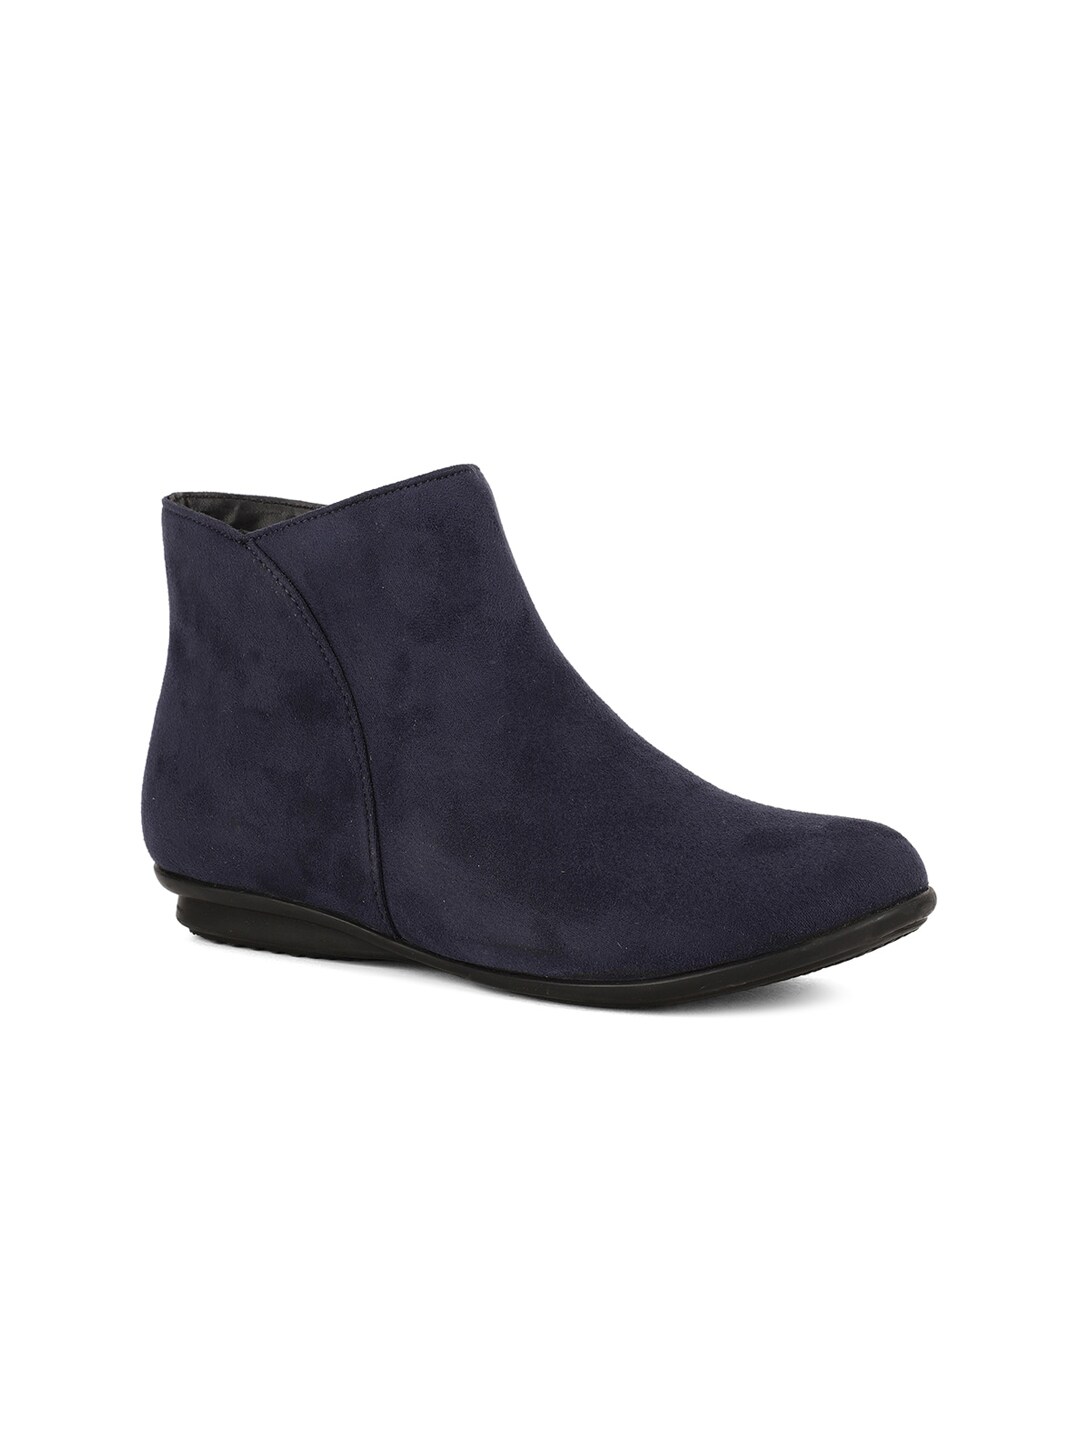 Bruno Manetti Women Navy Blue Leather Flat Boots Price in India